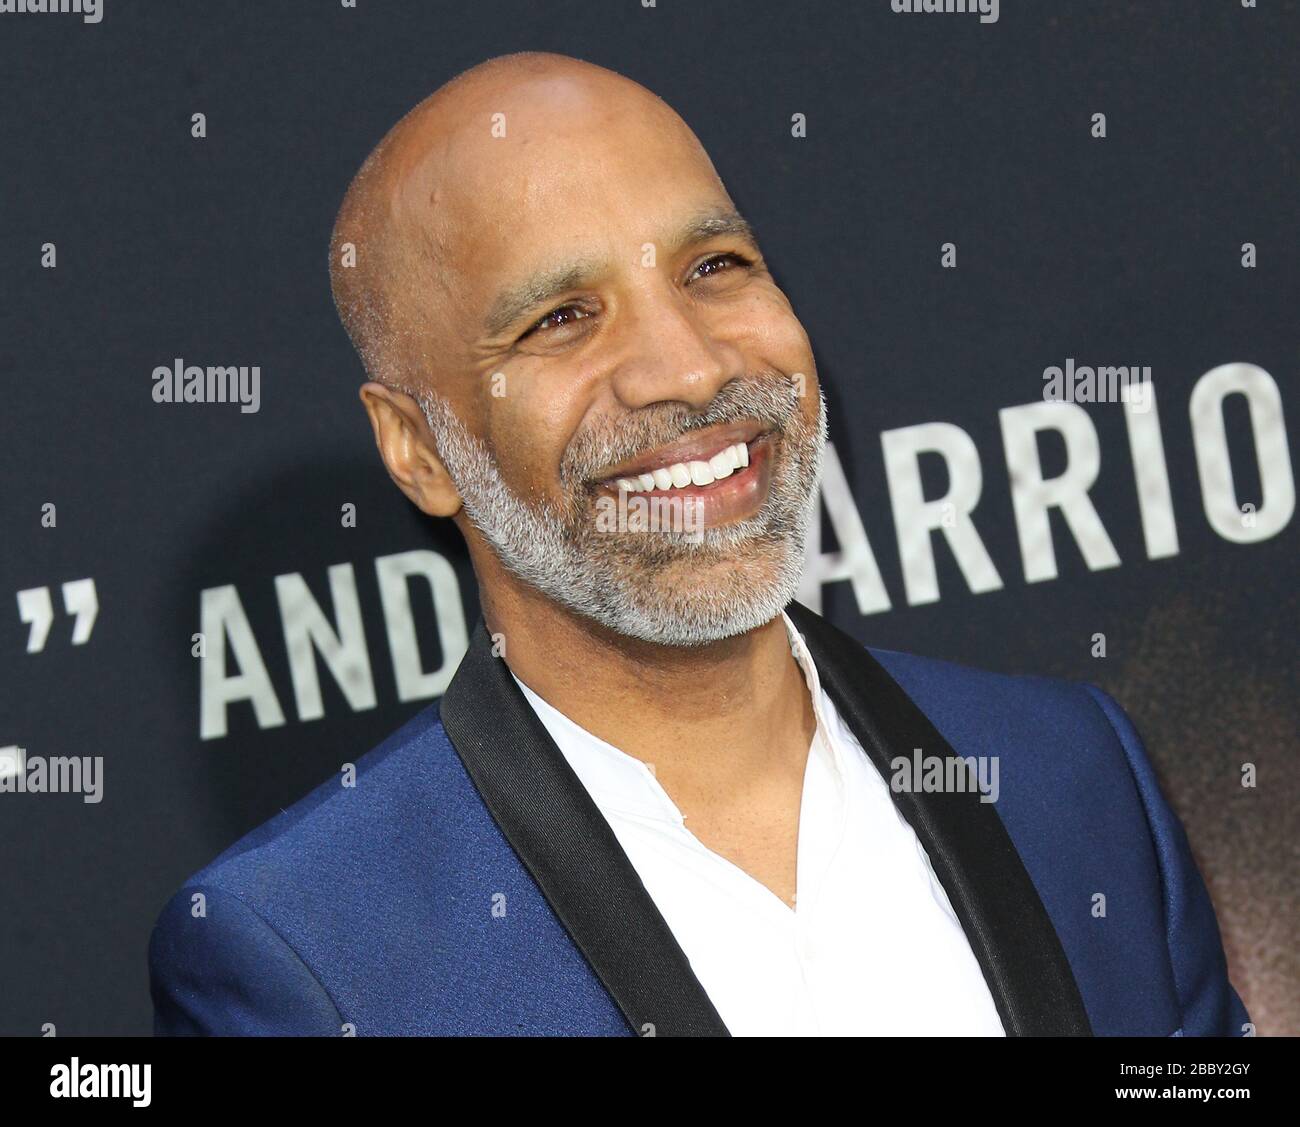 Warner Bros. Pictures “The Way Back” Premiere held at Regal LA Live in Los  Angeles, California. Featuring: Ravi D. Mehta Where: Los Angeles,  California, United States When: 01 Mar 2020 Credit: Adriana